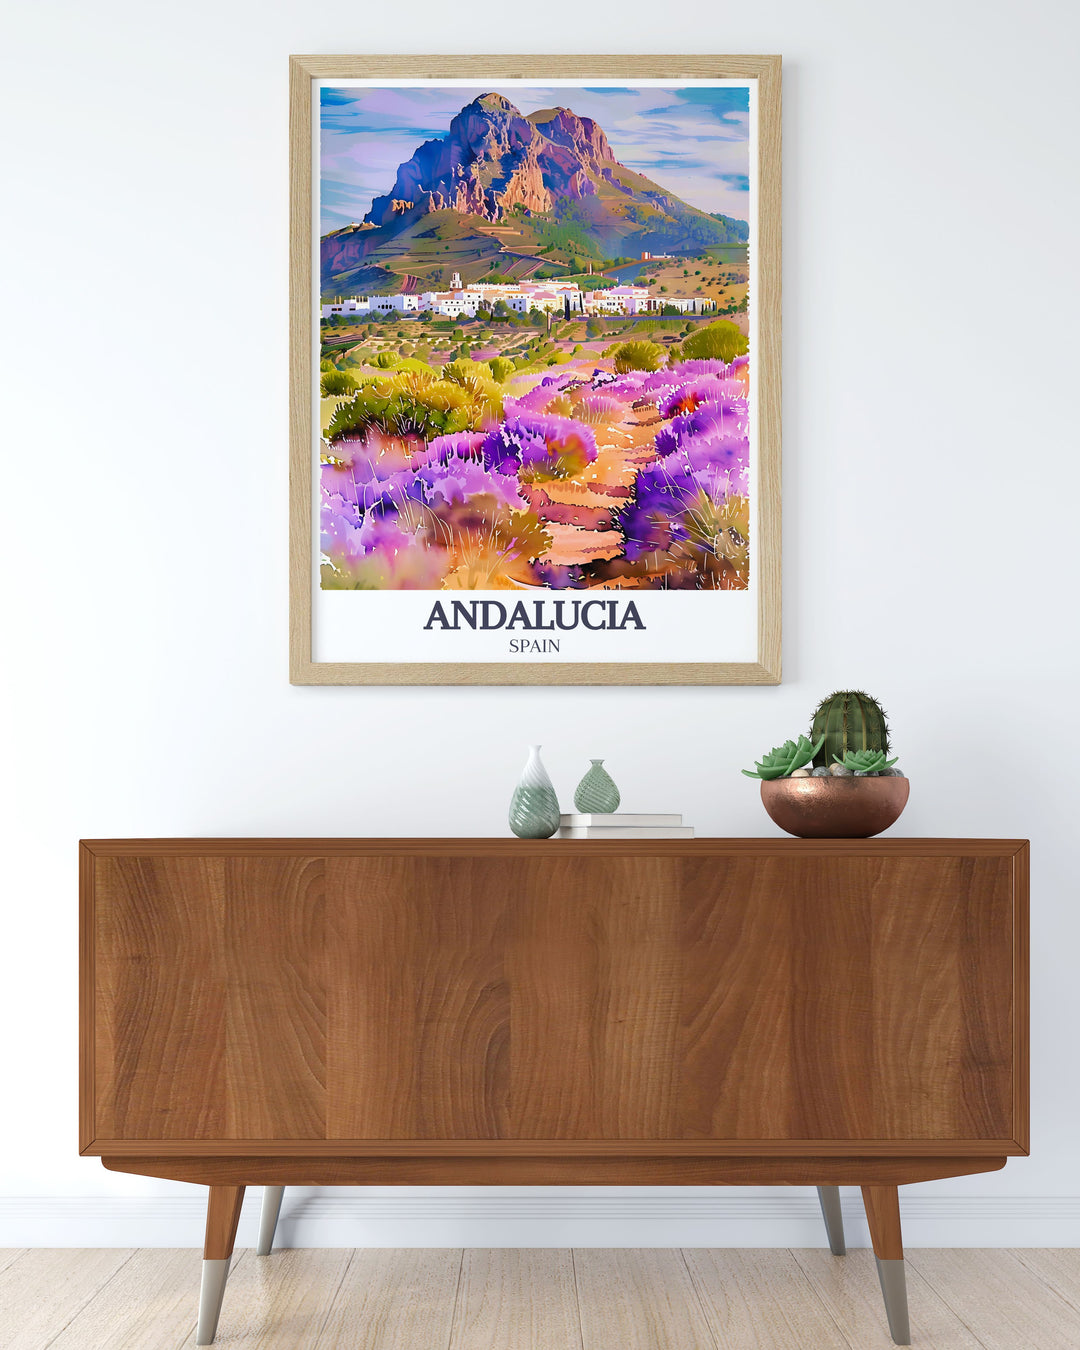 The travel poster highlights Zahara de la Sierra and the rolling Andalucia hills, capturing their serene landscapes and historical charm. Ideal for nature lovers and travel enthusiasts.